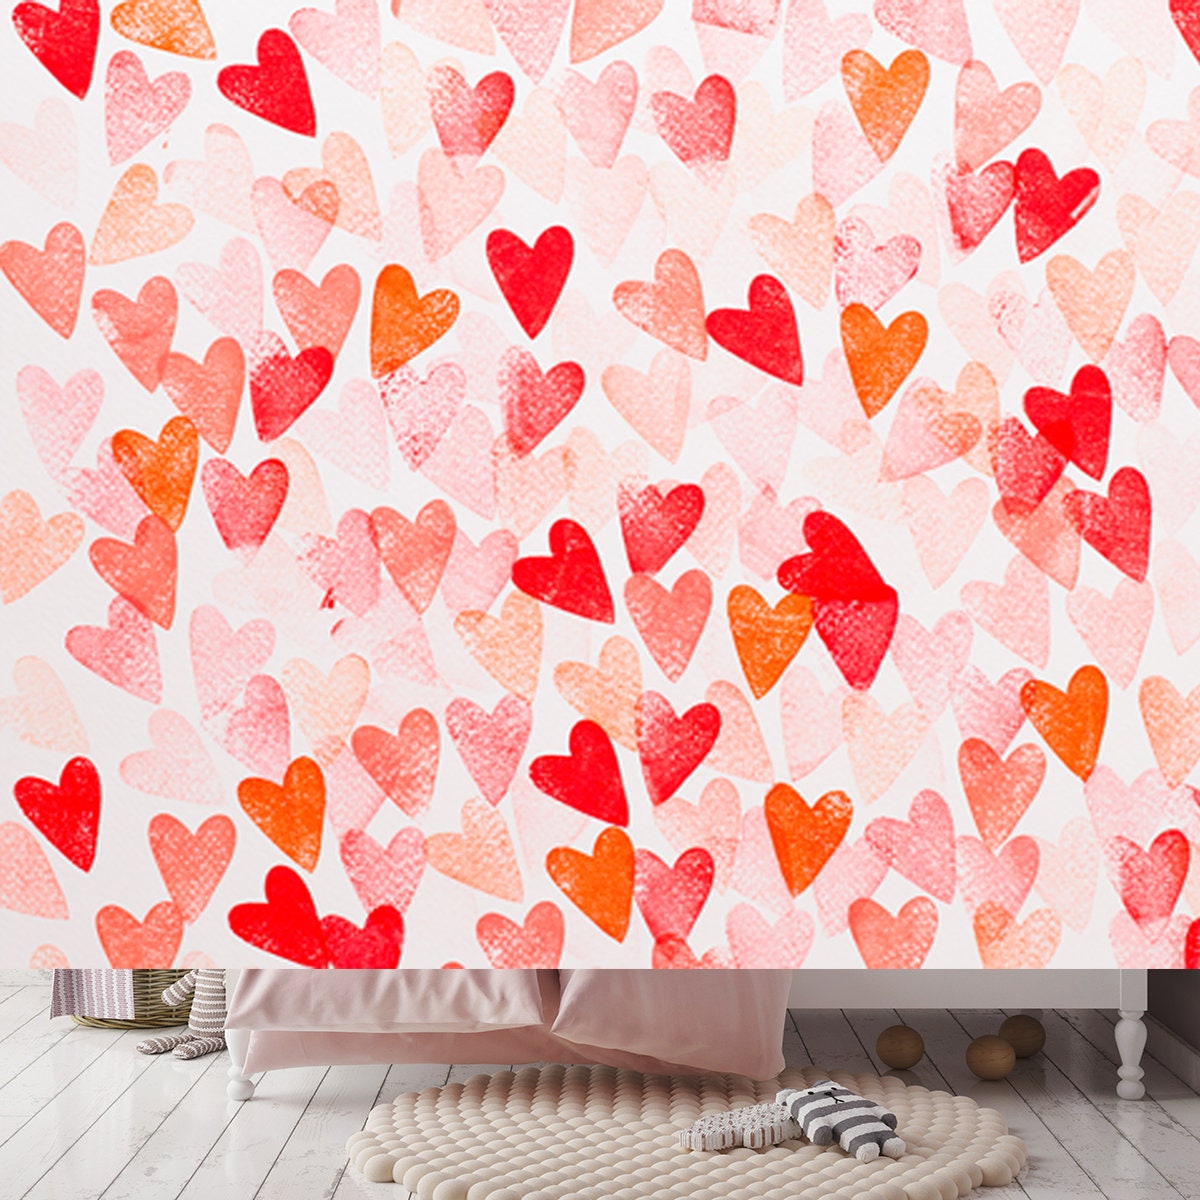 Abstract Watercolor Red, Pink Heart Background Wallpaper Gir Bedroom Mural